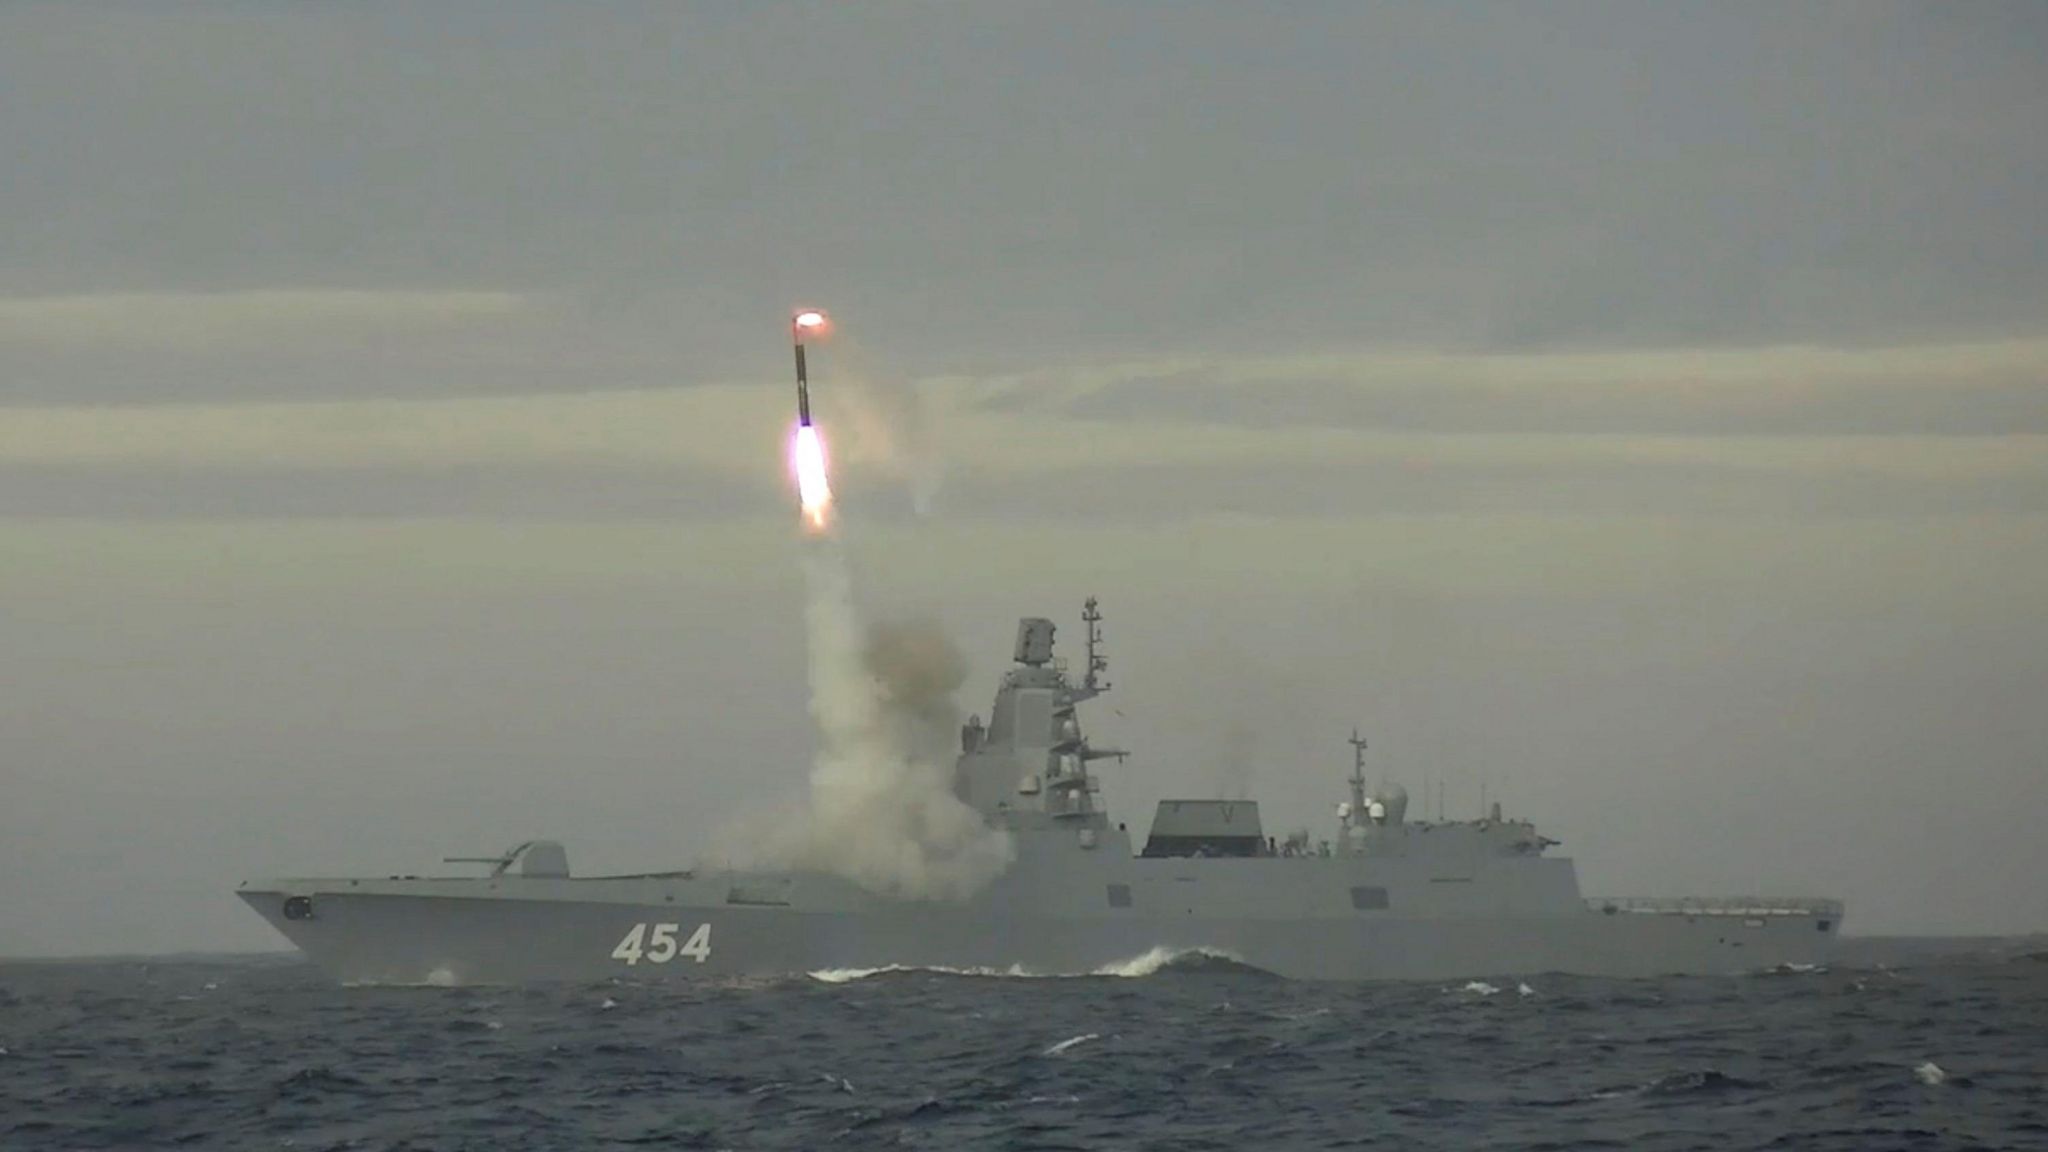 Russian defence ministry still of Zircon missile test from ship in 2022